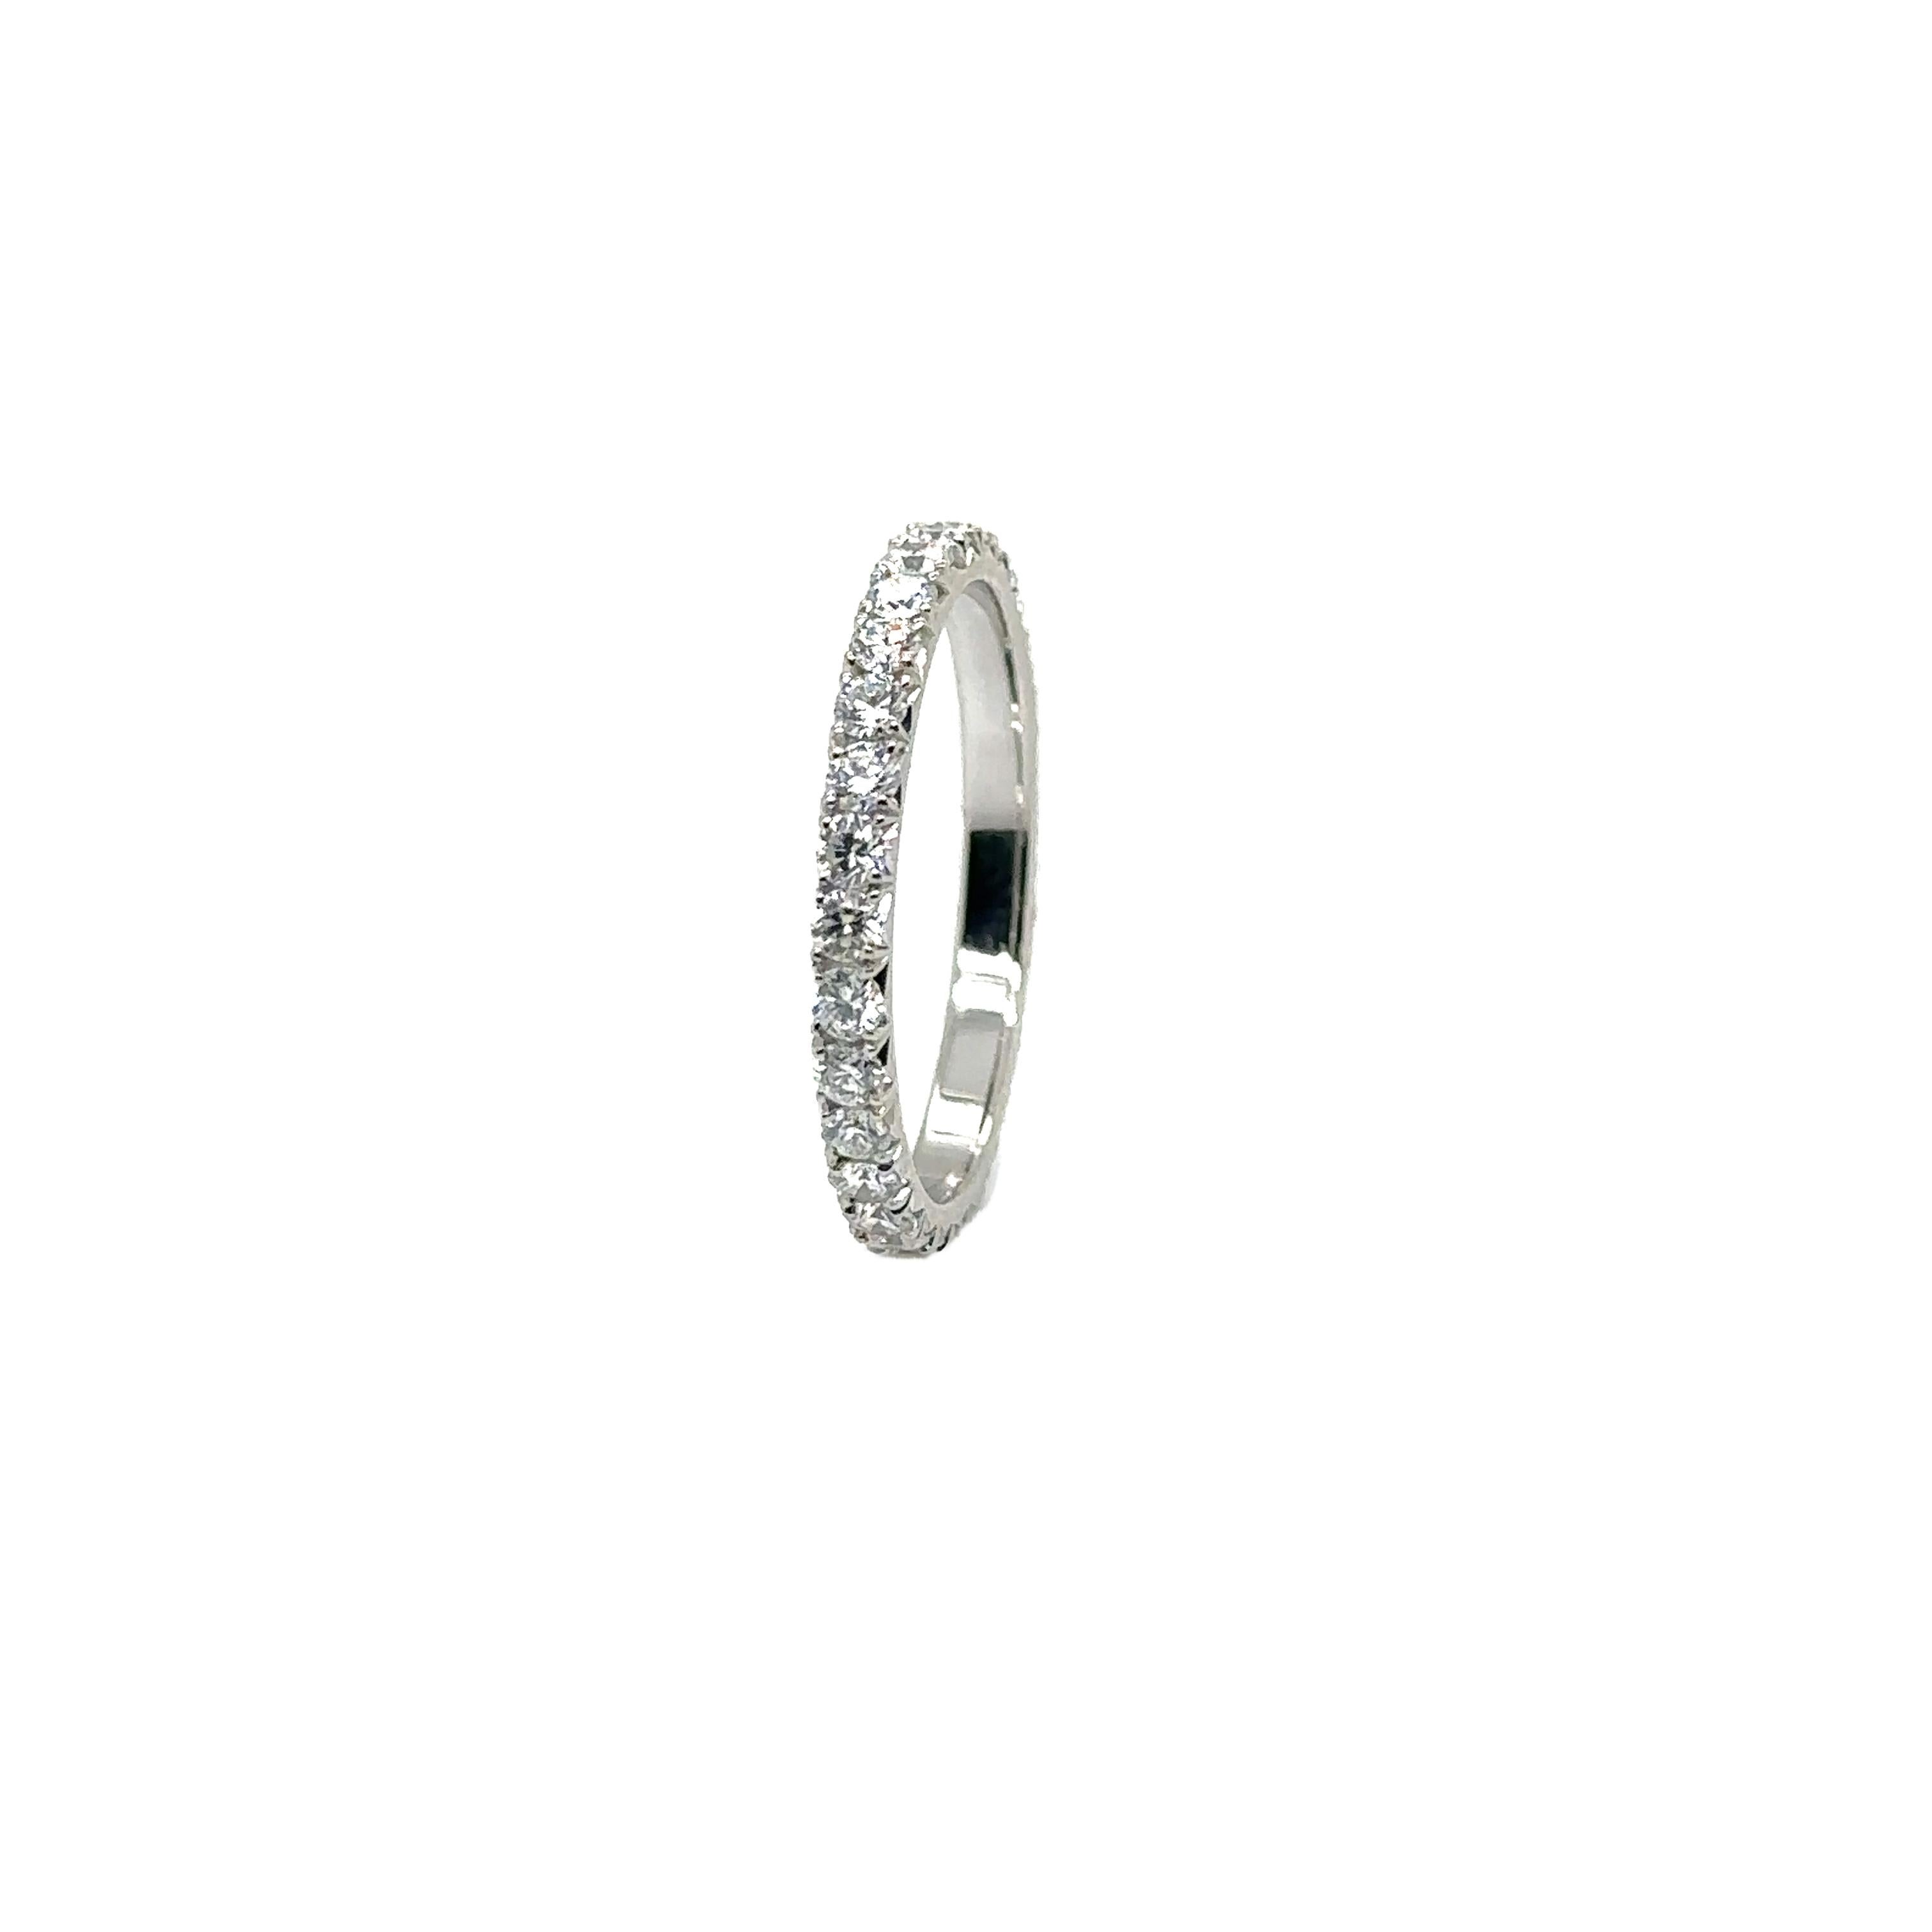 PLATINUM MICRO PAVE FISH TAIL BAND with 0.83 CWT DIAMONDS
Metal: PLATINUM
Diamond Info: 30 - G/VS ROUND BRILLIANT DIAMONDS 
Total Ct Weight: 0.83 cwt.
Item Weight:  2.08 gm
Ring Size: 6 ¼ (Can be sized up to 6 ½)
Measurements:  2.10 mm width
